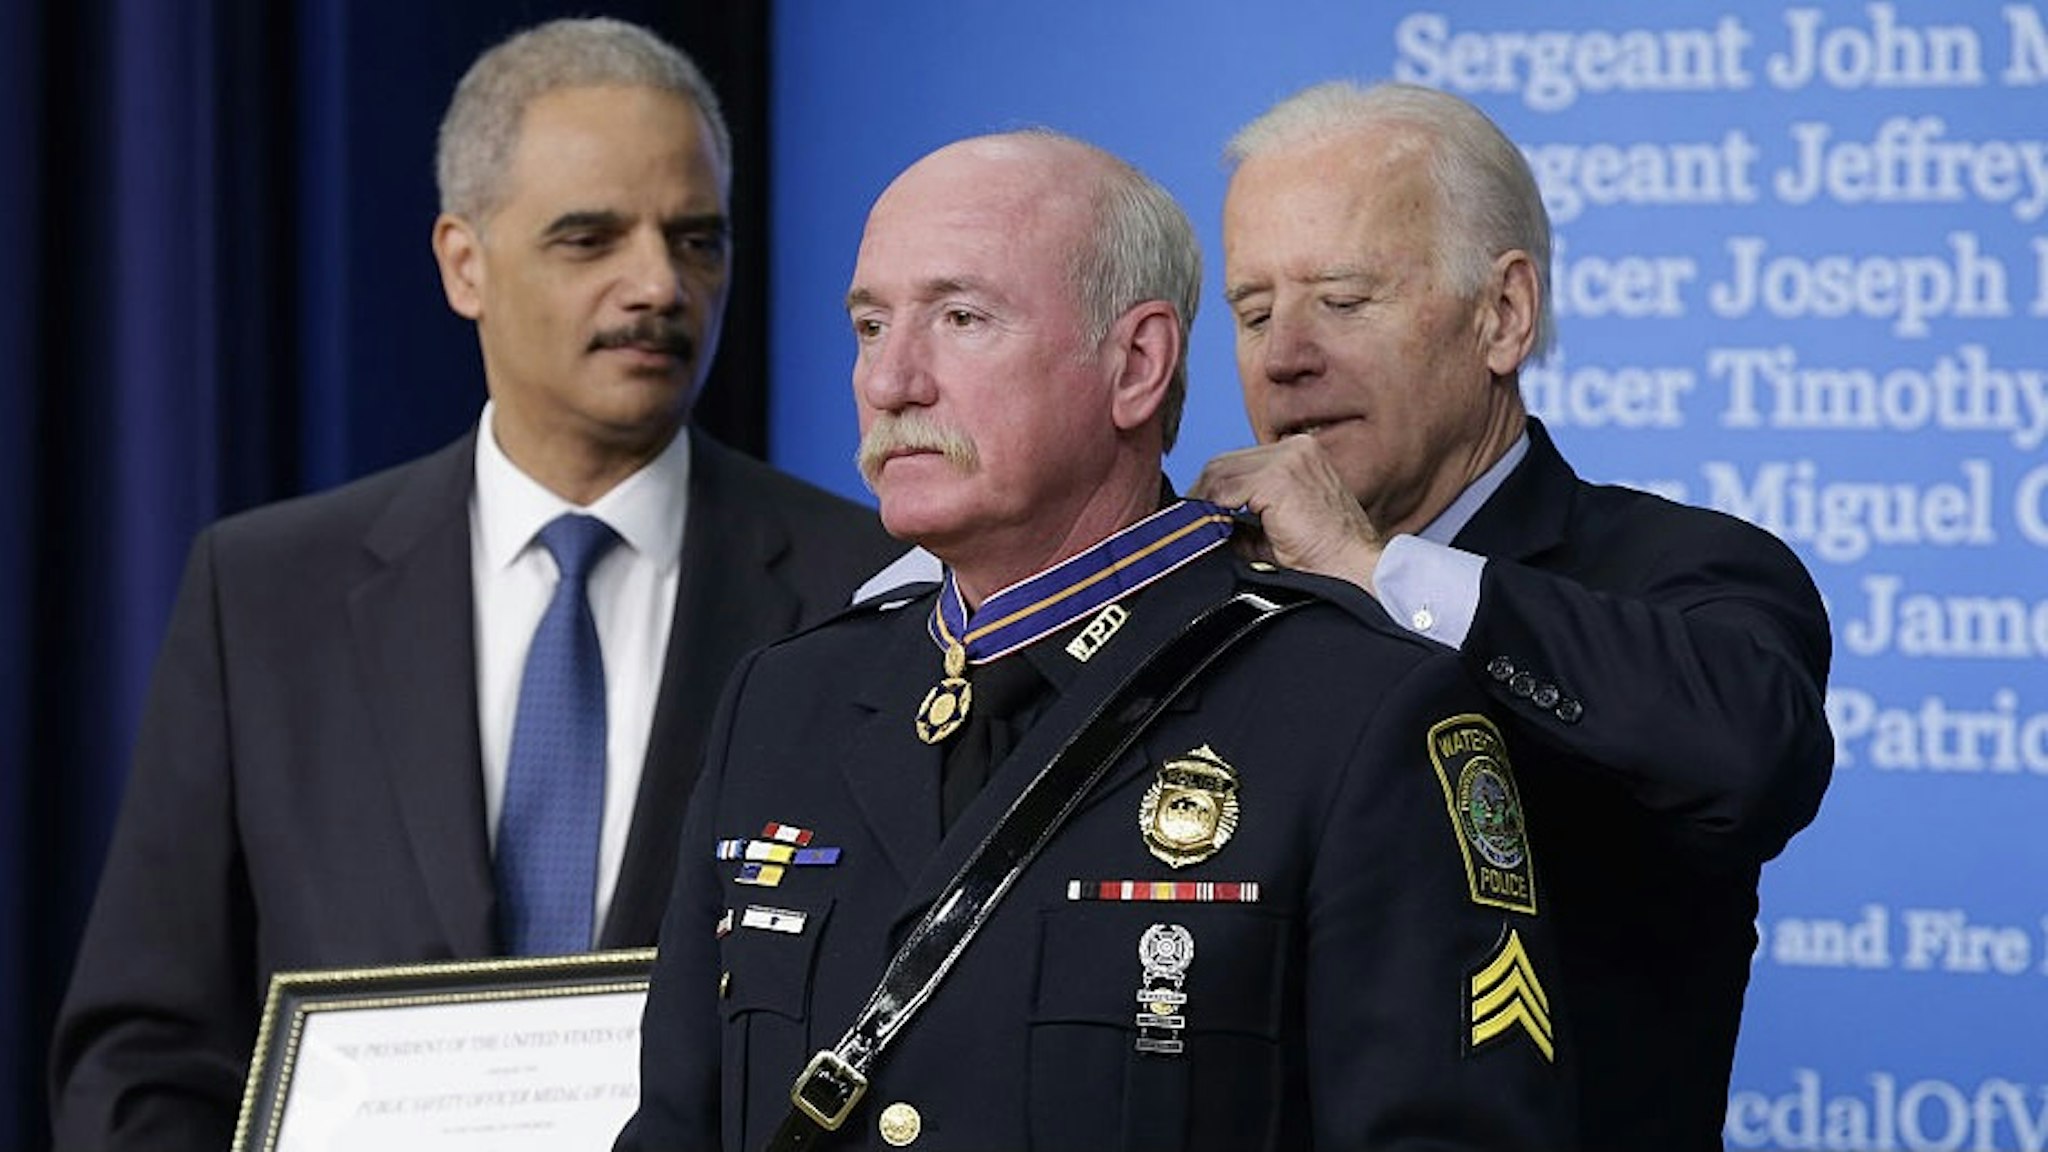 VP Biden And Attorney Gen. Holder Speak At Medal Of Valor Ceremony WASHINGTON, DC - FEBRUARY 11: U.S. Vice President Joe Biden (R) awards Watertown, Massachusetts, Police Sergeant Jeffrey Pugliese with the Public Safety Officer Medal of Valor during a ceremony with Attorney General Eric Holder (L) in the South Court Auditorium at the Eisenhower Executive Office Building February 11, 2015 in Washington, DC. According to the White House, Pugliese was one of several officers and fire fighters who battled with the Boston Marathon bombing suspects, resulting in the death of Tamerlan Tsarnaev and the eventual capture of his brother, Dzhokhar. The medal is the highest national award for valor by a public safety officer who exhibits 'exceptional courage, extraordinary decisiveness, presence of mind and unusual swiftness of action, regardless of his or her personal safety, in an attempt to save or protect human life.' (Photo by Chip Somodevilla/Getty Images) Chip Somodevilla / Staff via Getty Images